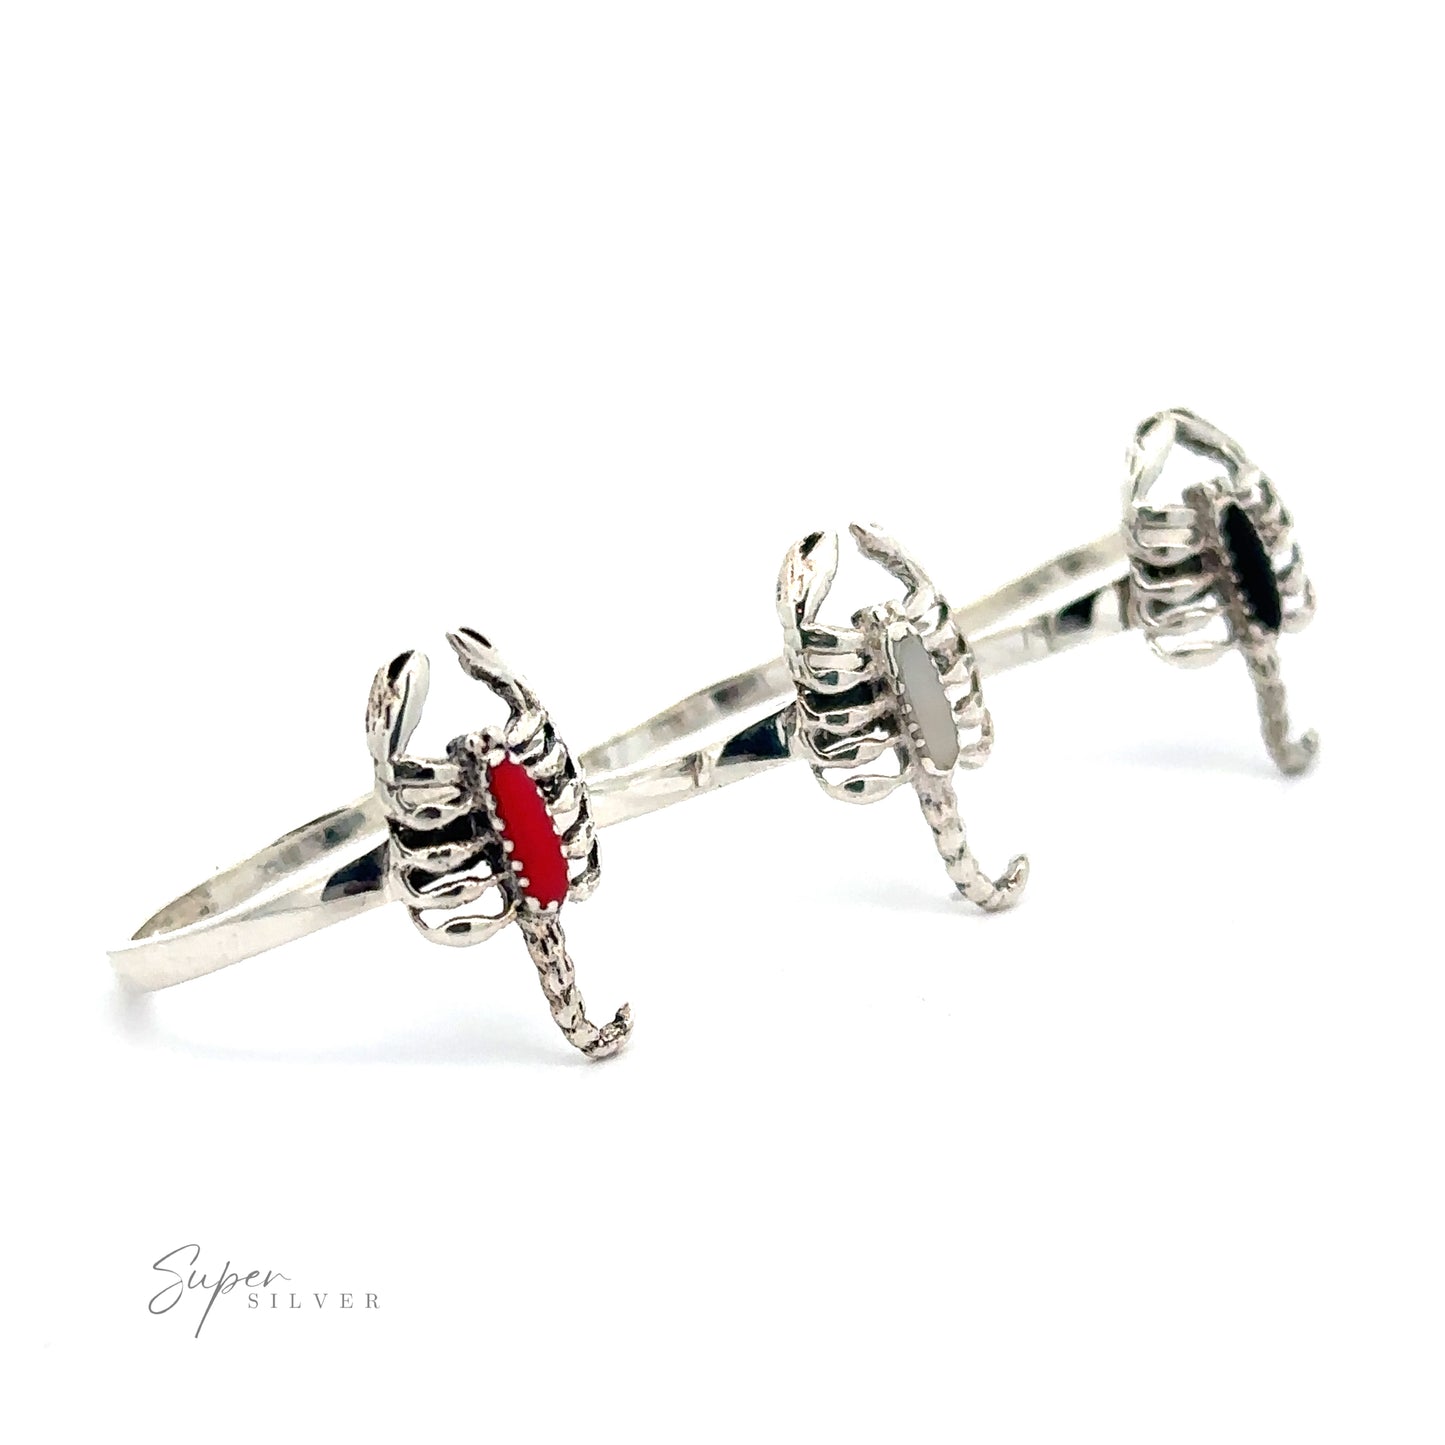 Three Small Scorpion Rings with Inlaid Stone displayed on a white background, with the middle ring featuring a red stone.